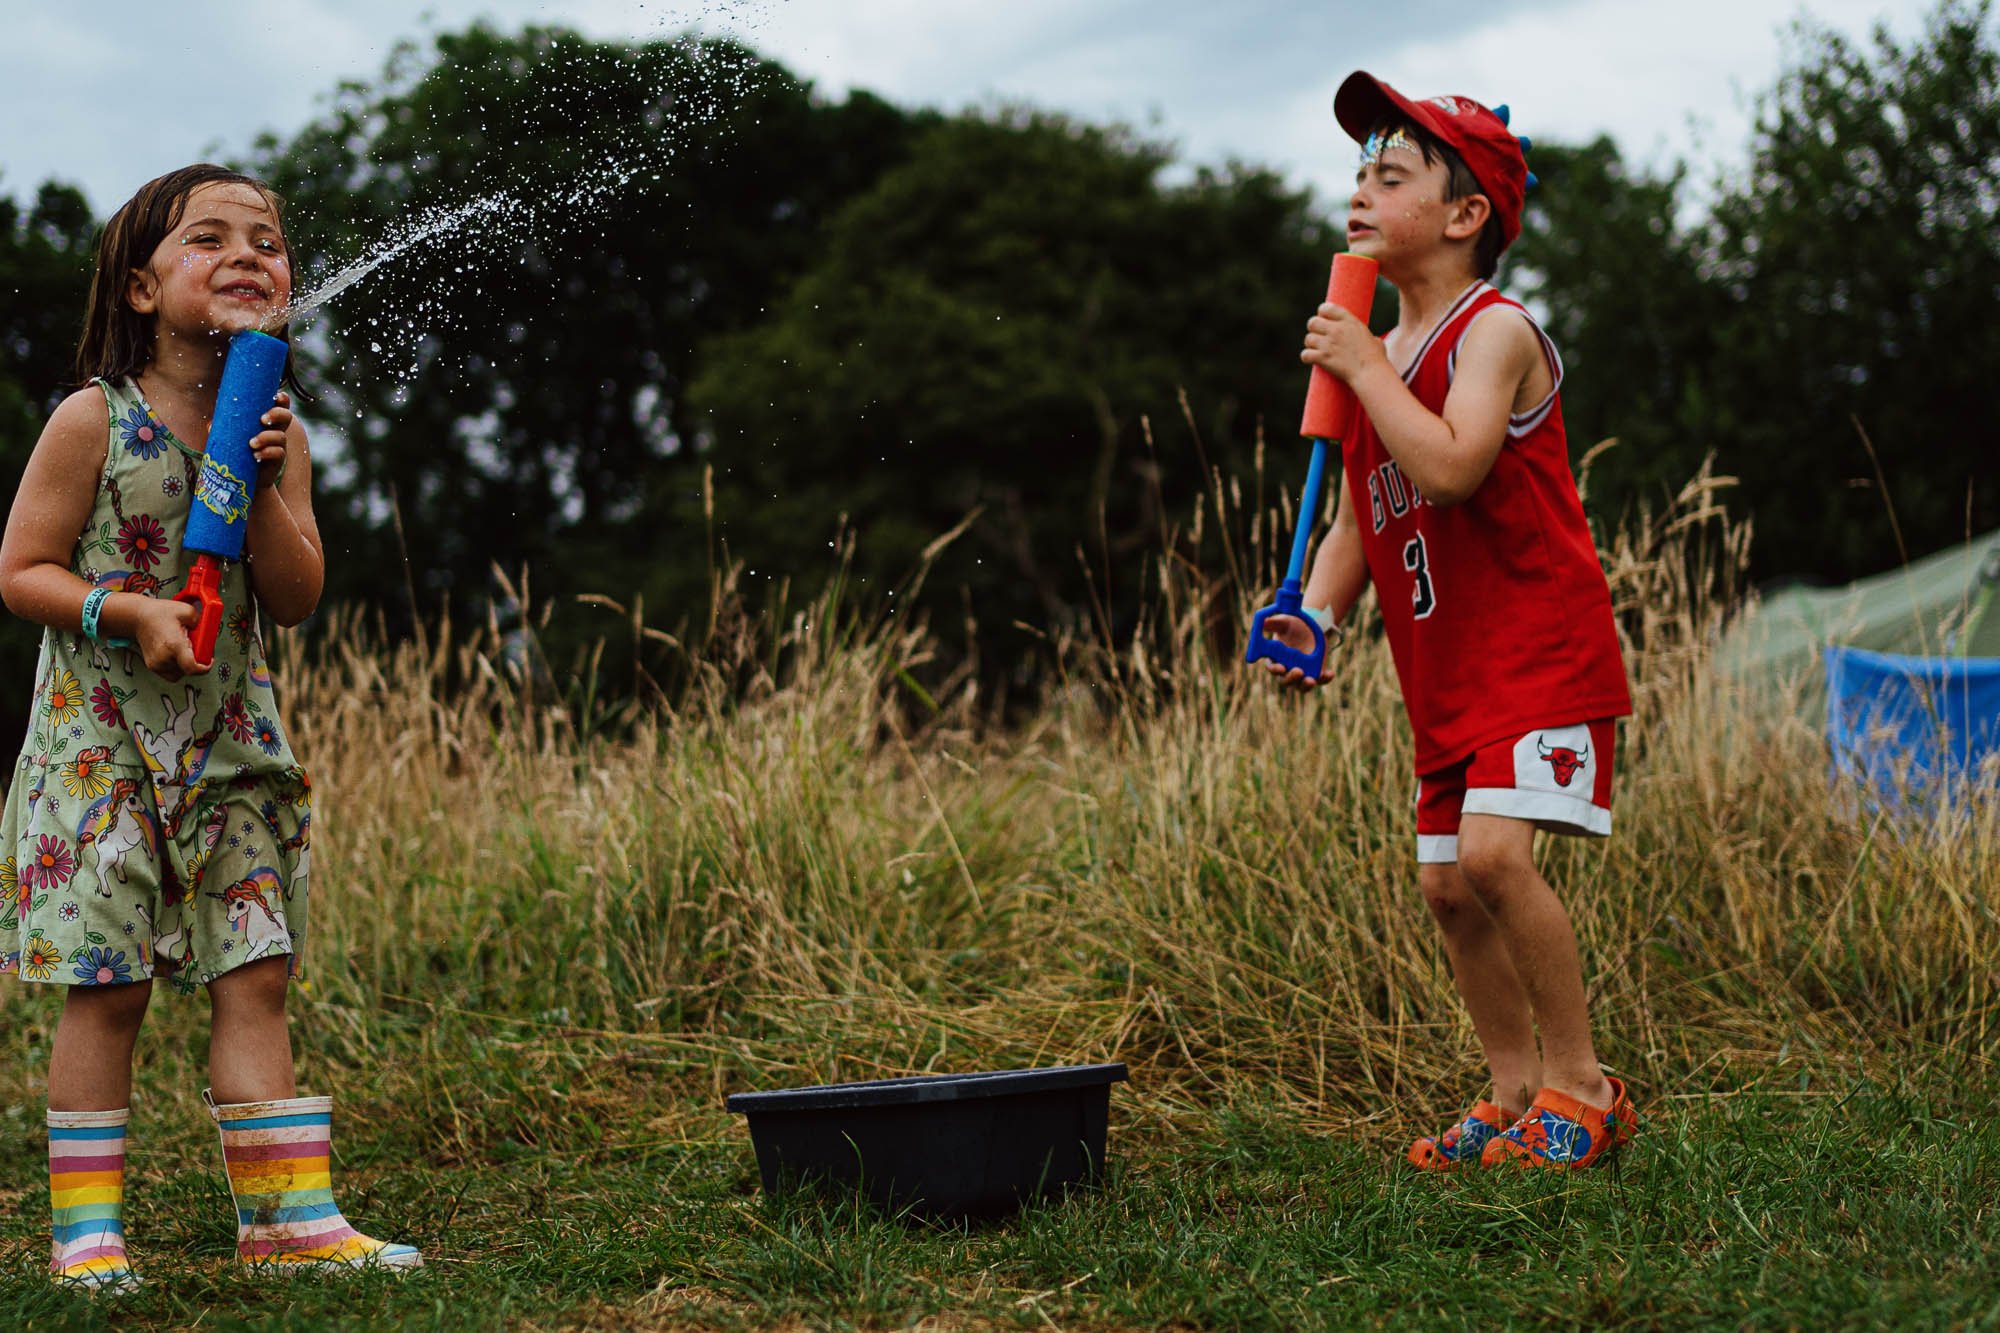 burgess-hill-ditchling-family-photographer-unposed-girl-boy-water-gun-fun-campsite-in-sussex.jpg